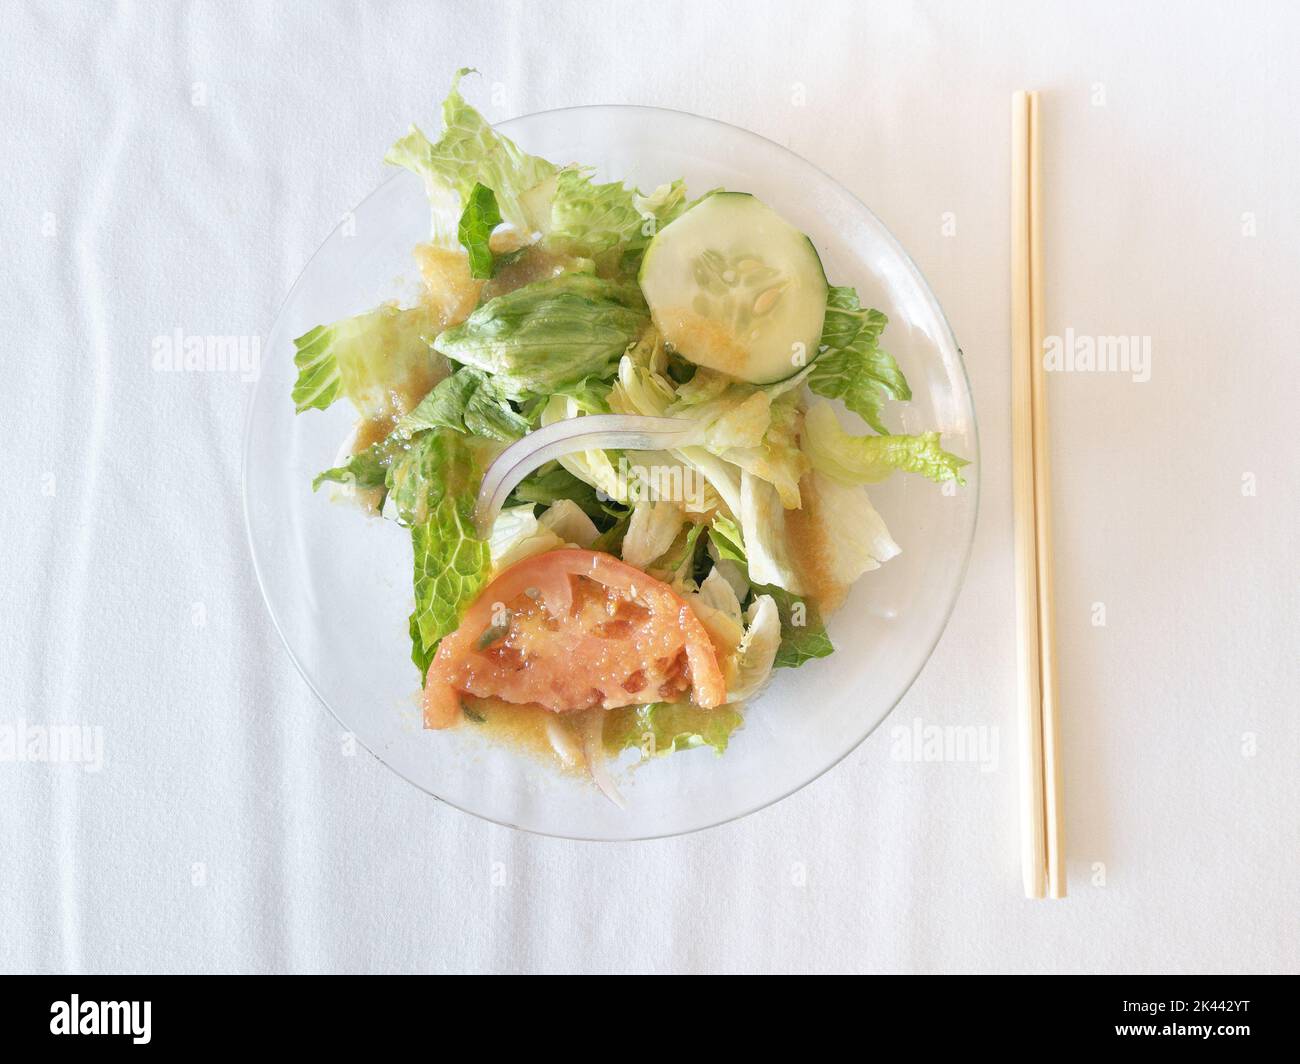 Japanese salad with tomato, iceberg lettuce,cucumber and onion, served in plate with chopsticks Stock Photo